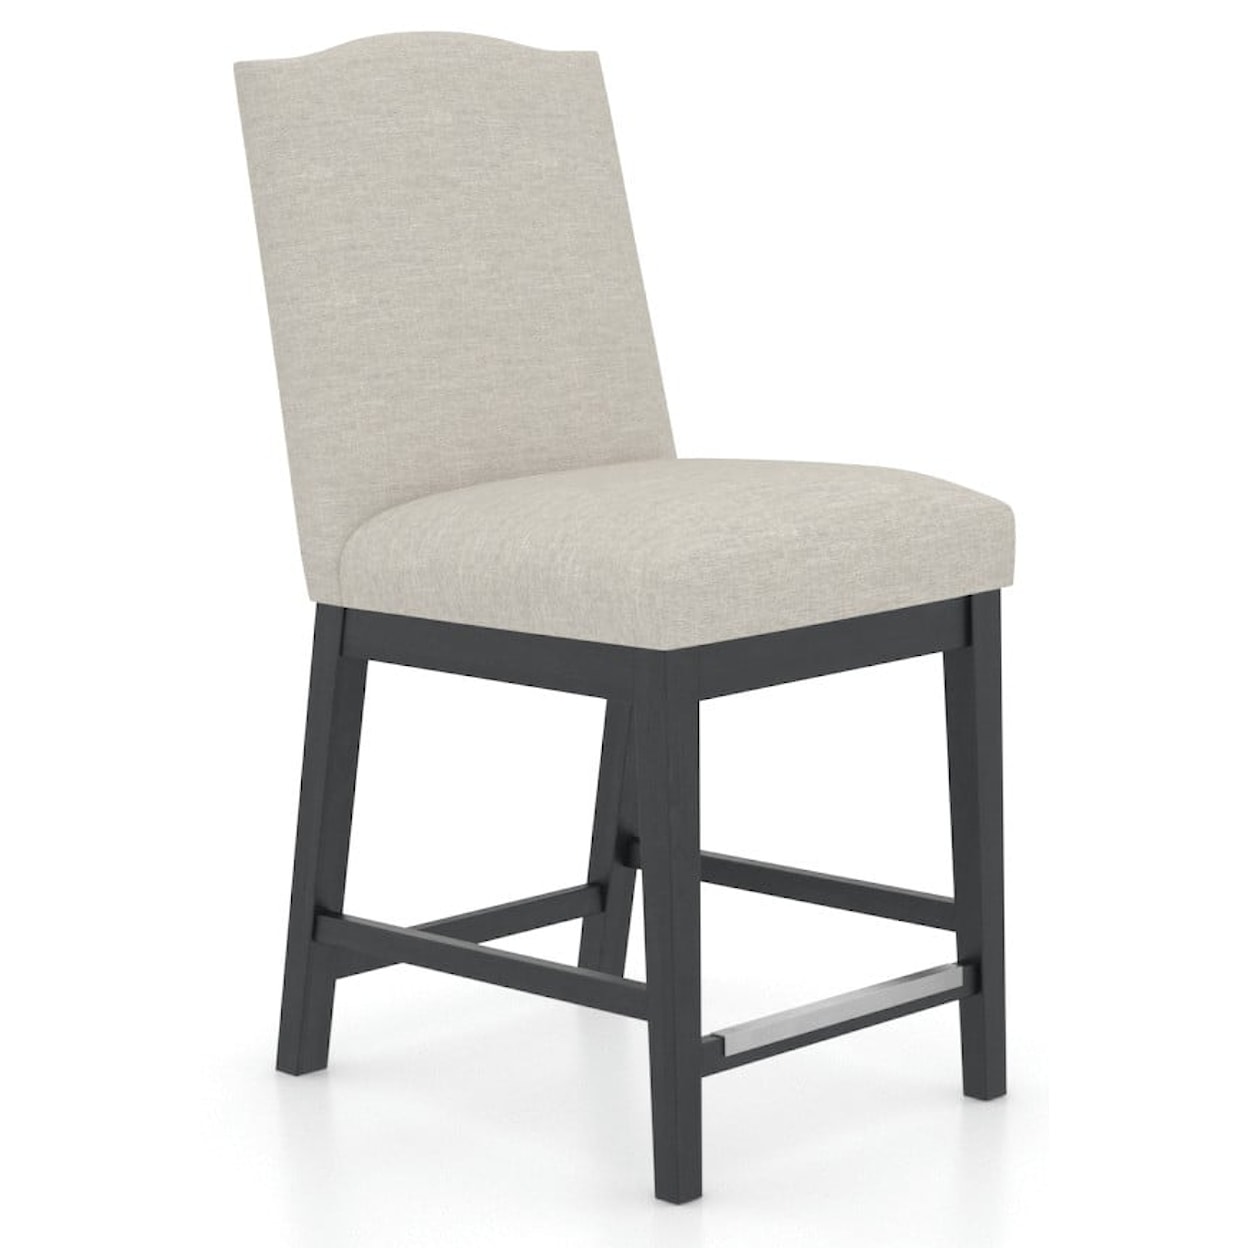 Canadel Canadel Customizable Upholstered Counter Stool